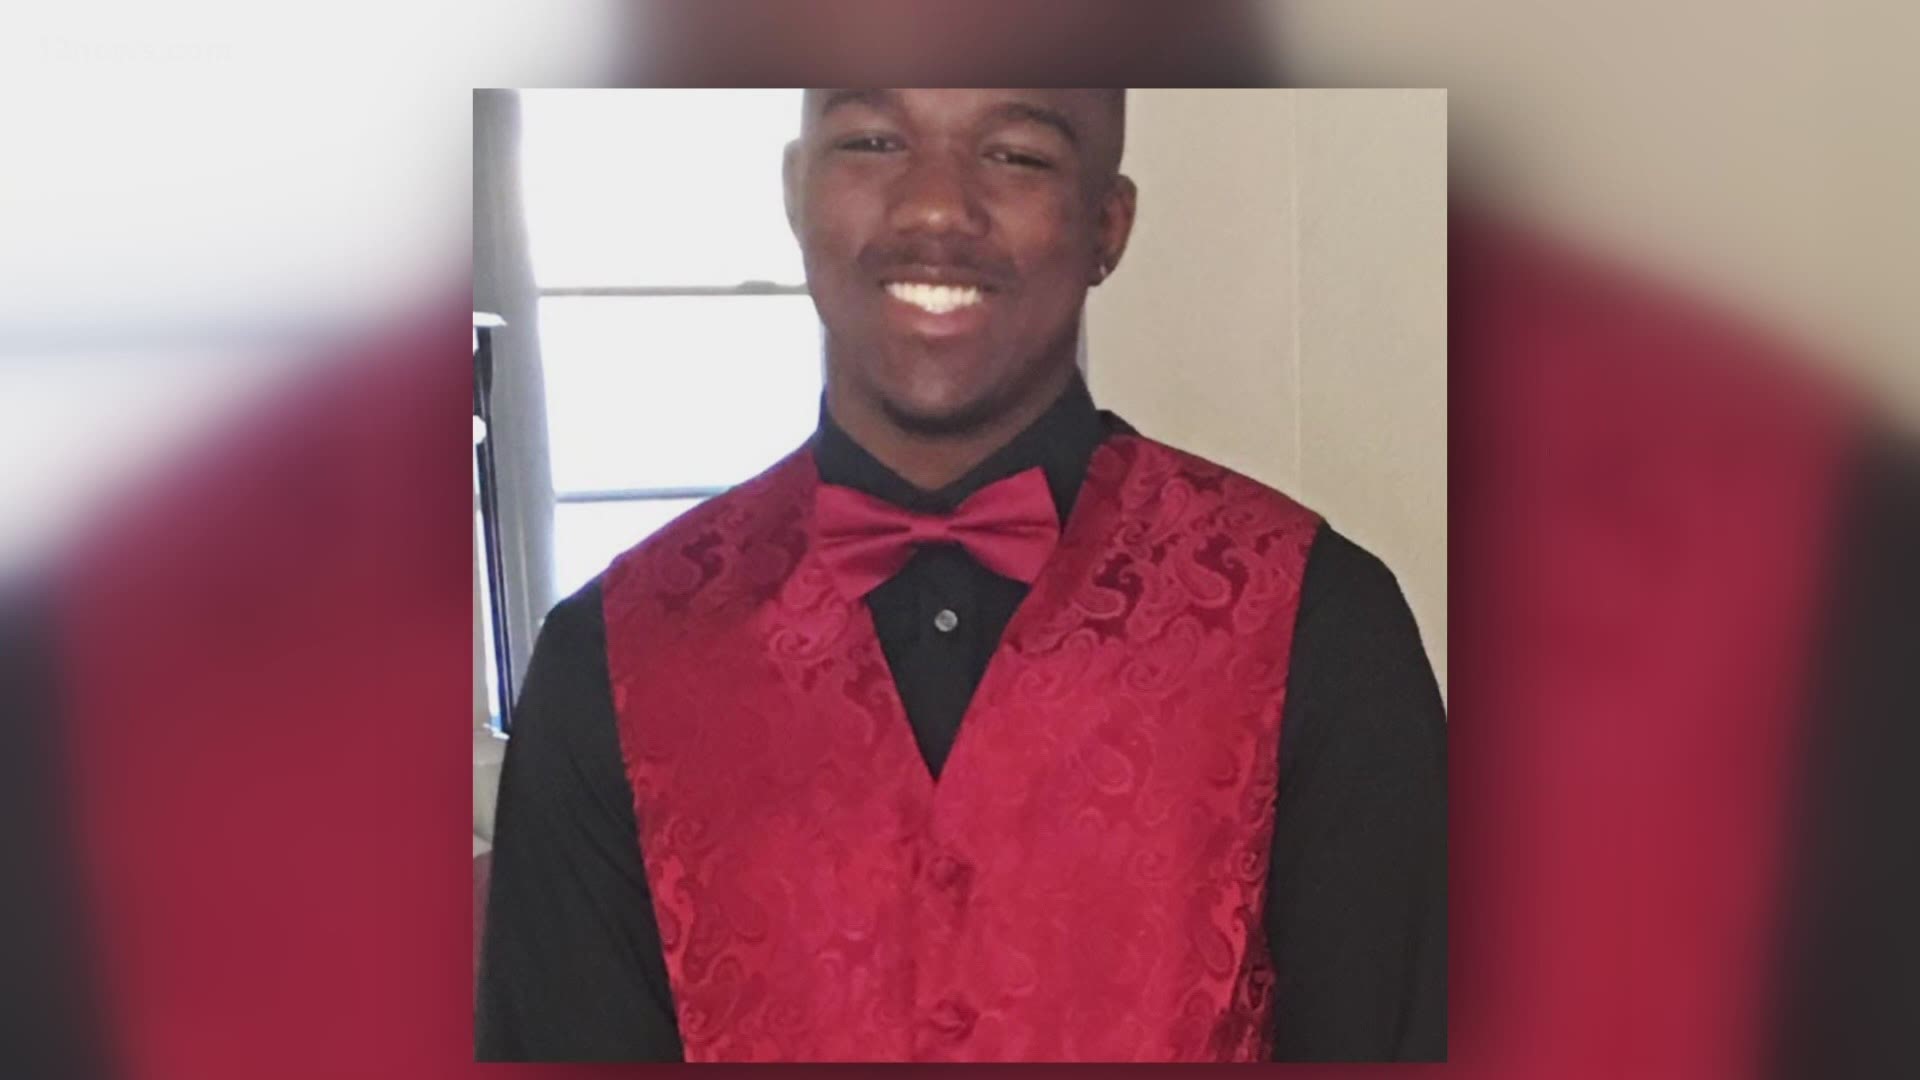 Family and friends are mourning the loss of a standout football player at Hamilton High in Chandler.